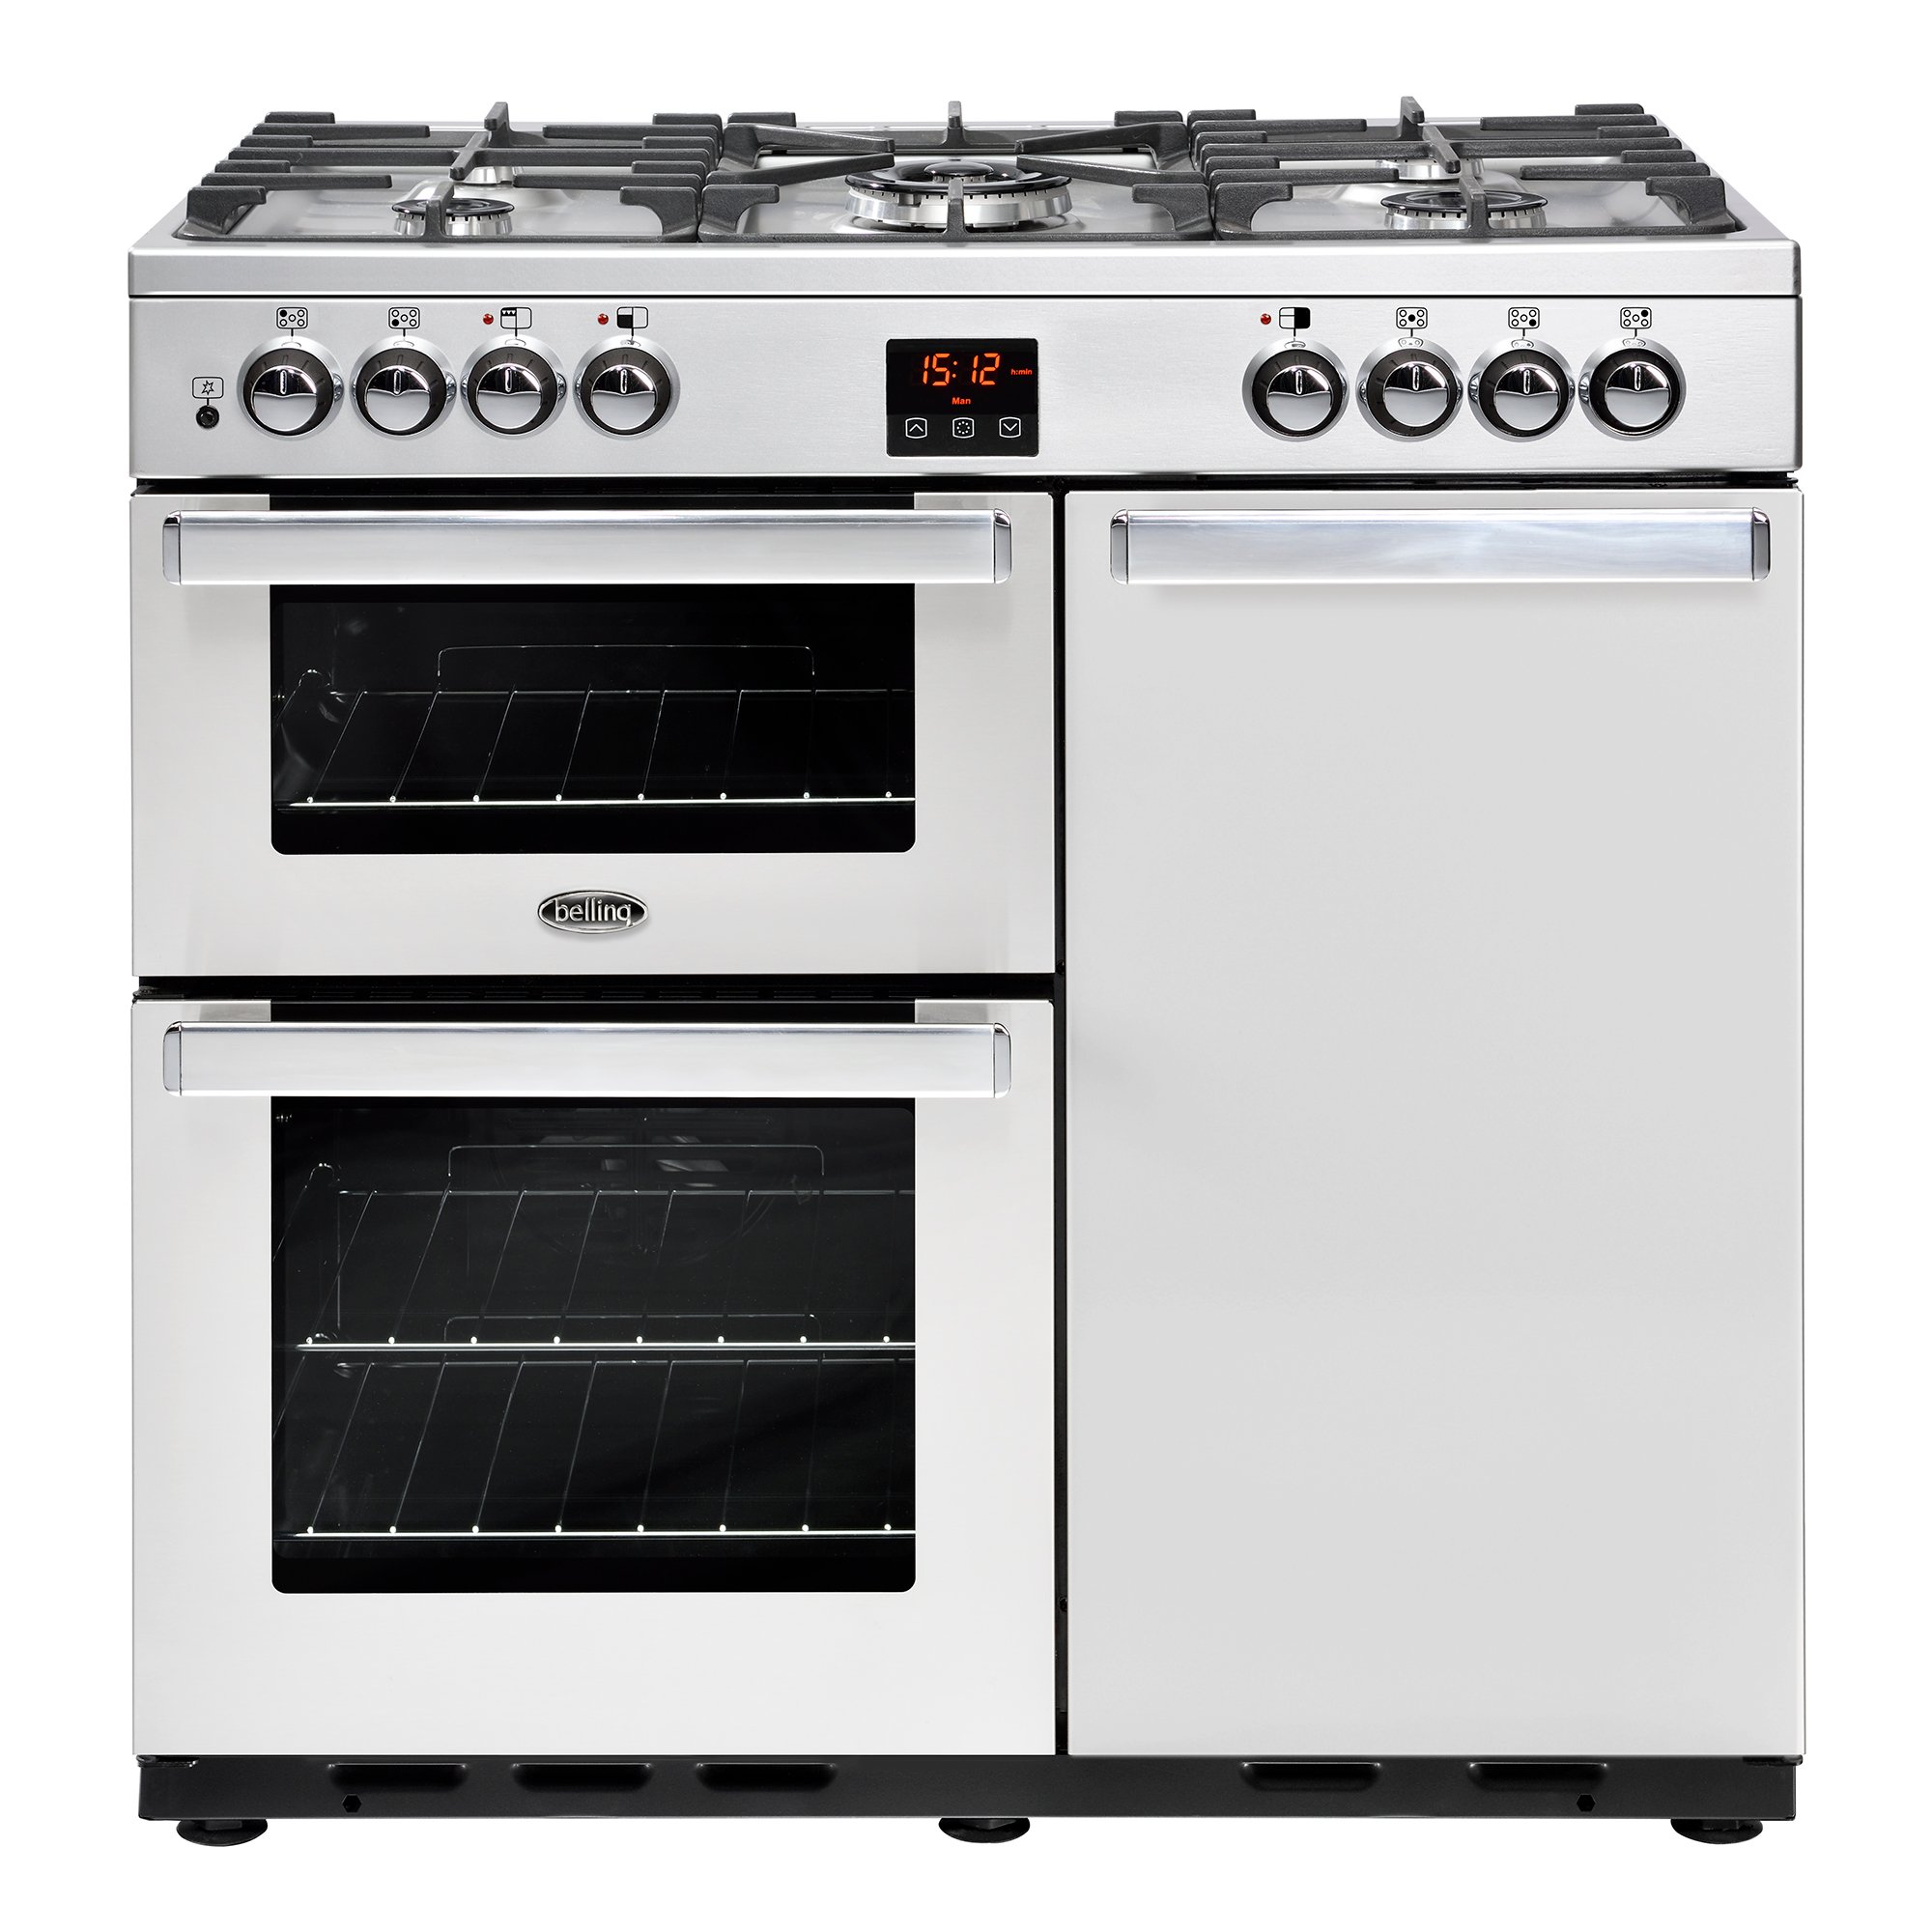 90cm dual fuel range cooker with 5 burner gas hob, conventional oven & grill, main fanned electric oven and tall fanned electric oven.